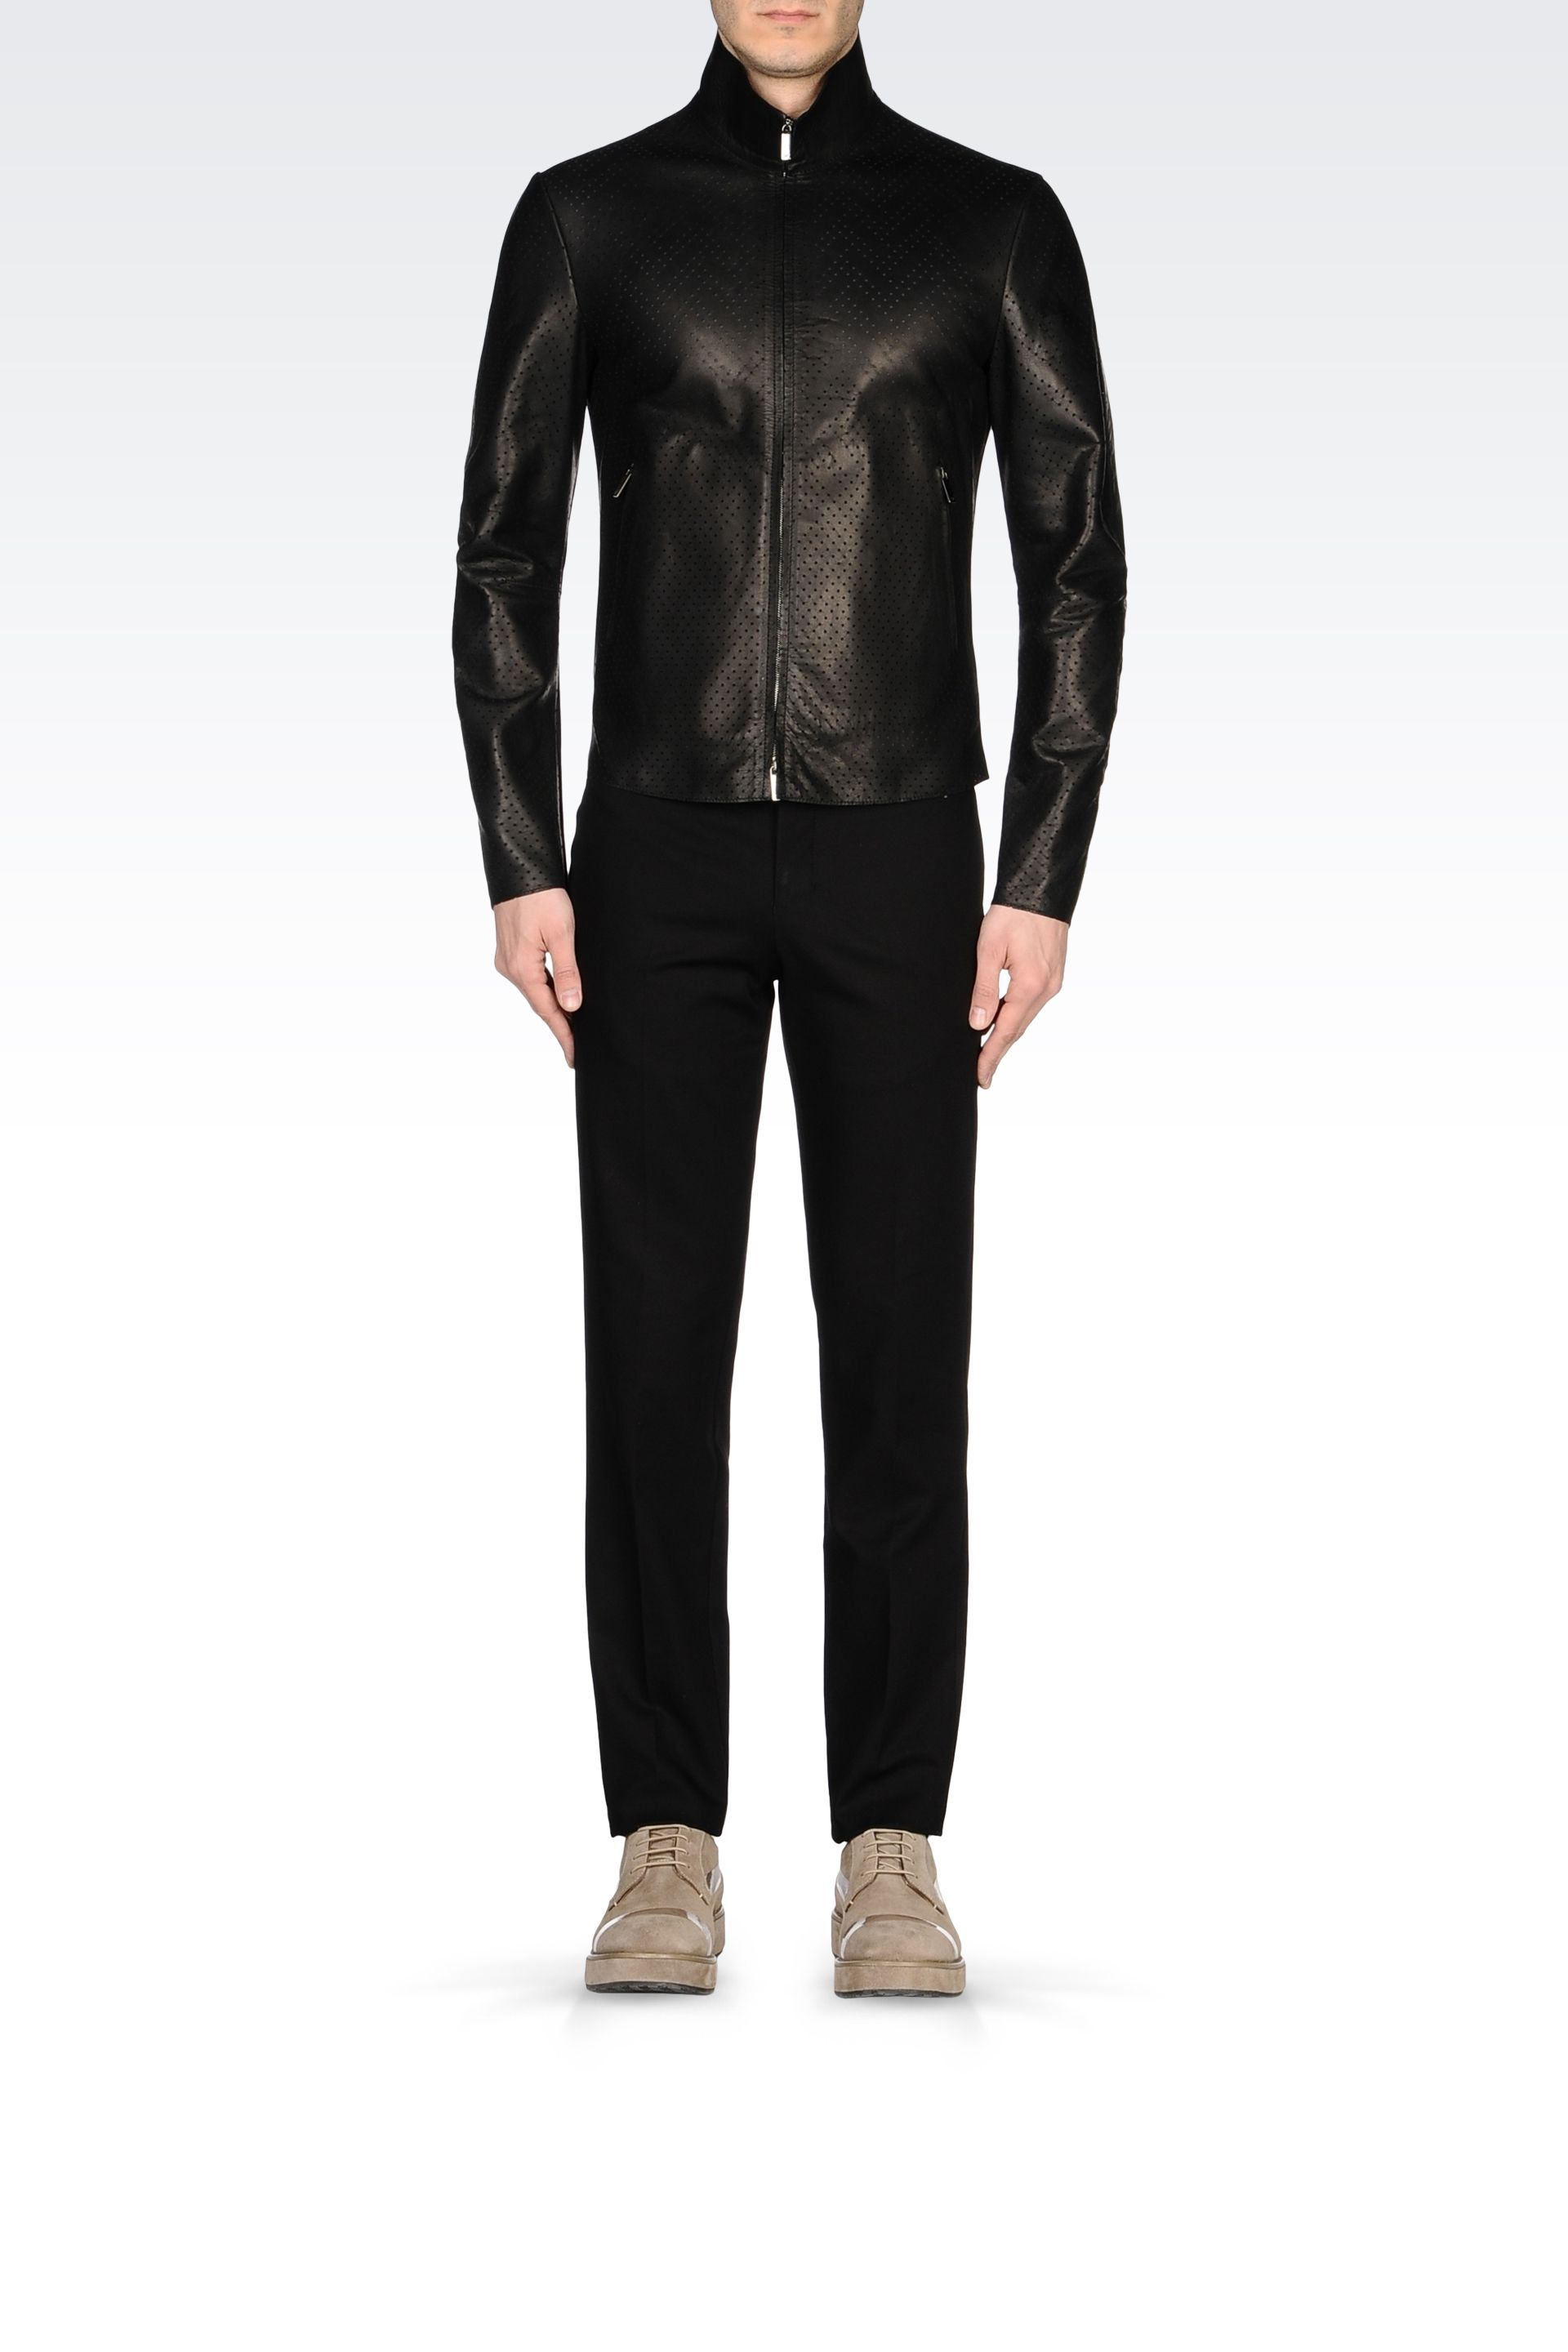 Emporio armani Leather Jacket in Black for Men | Lyst